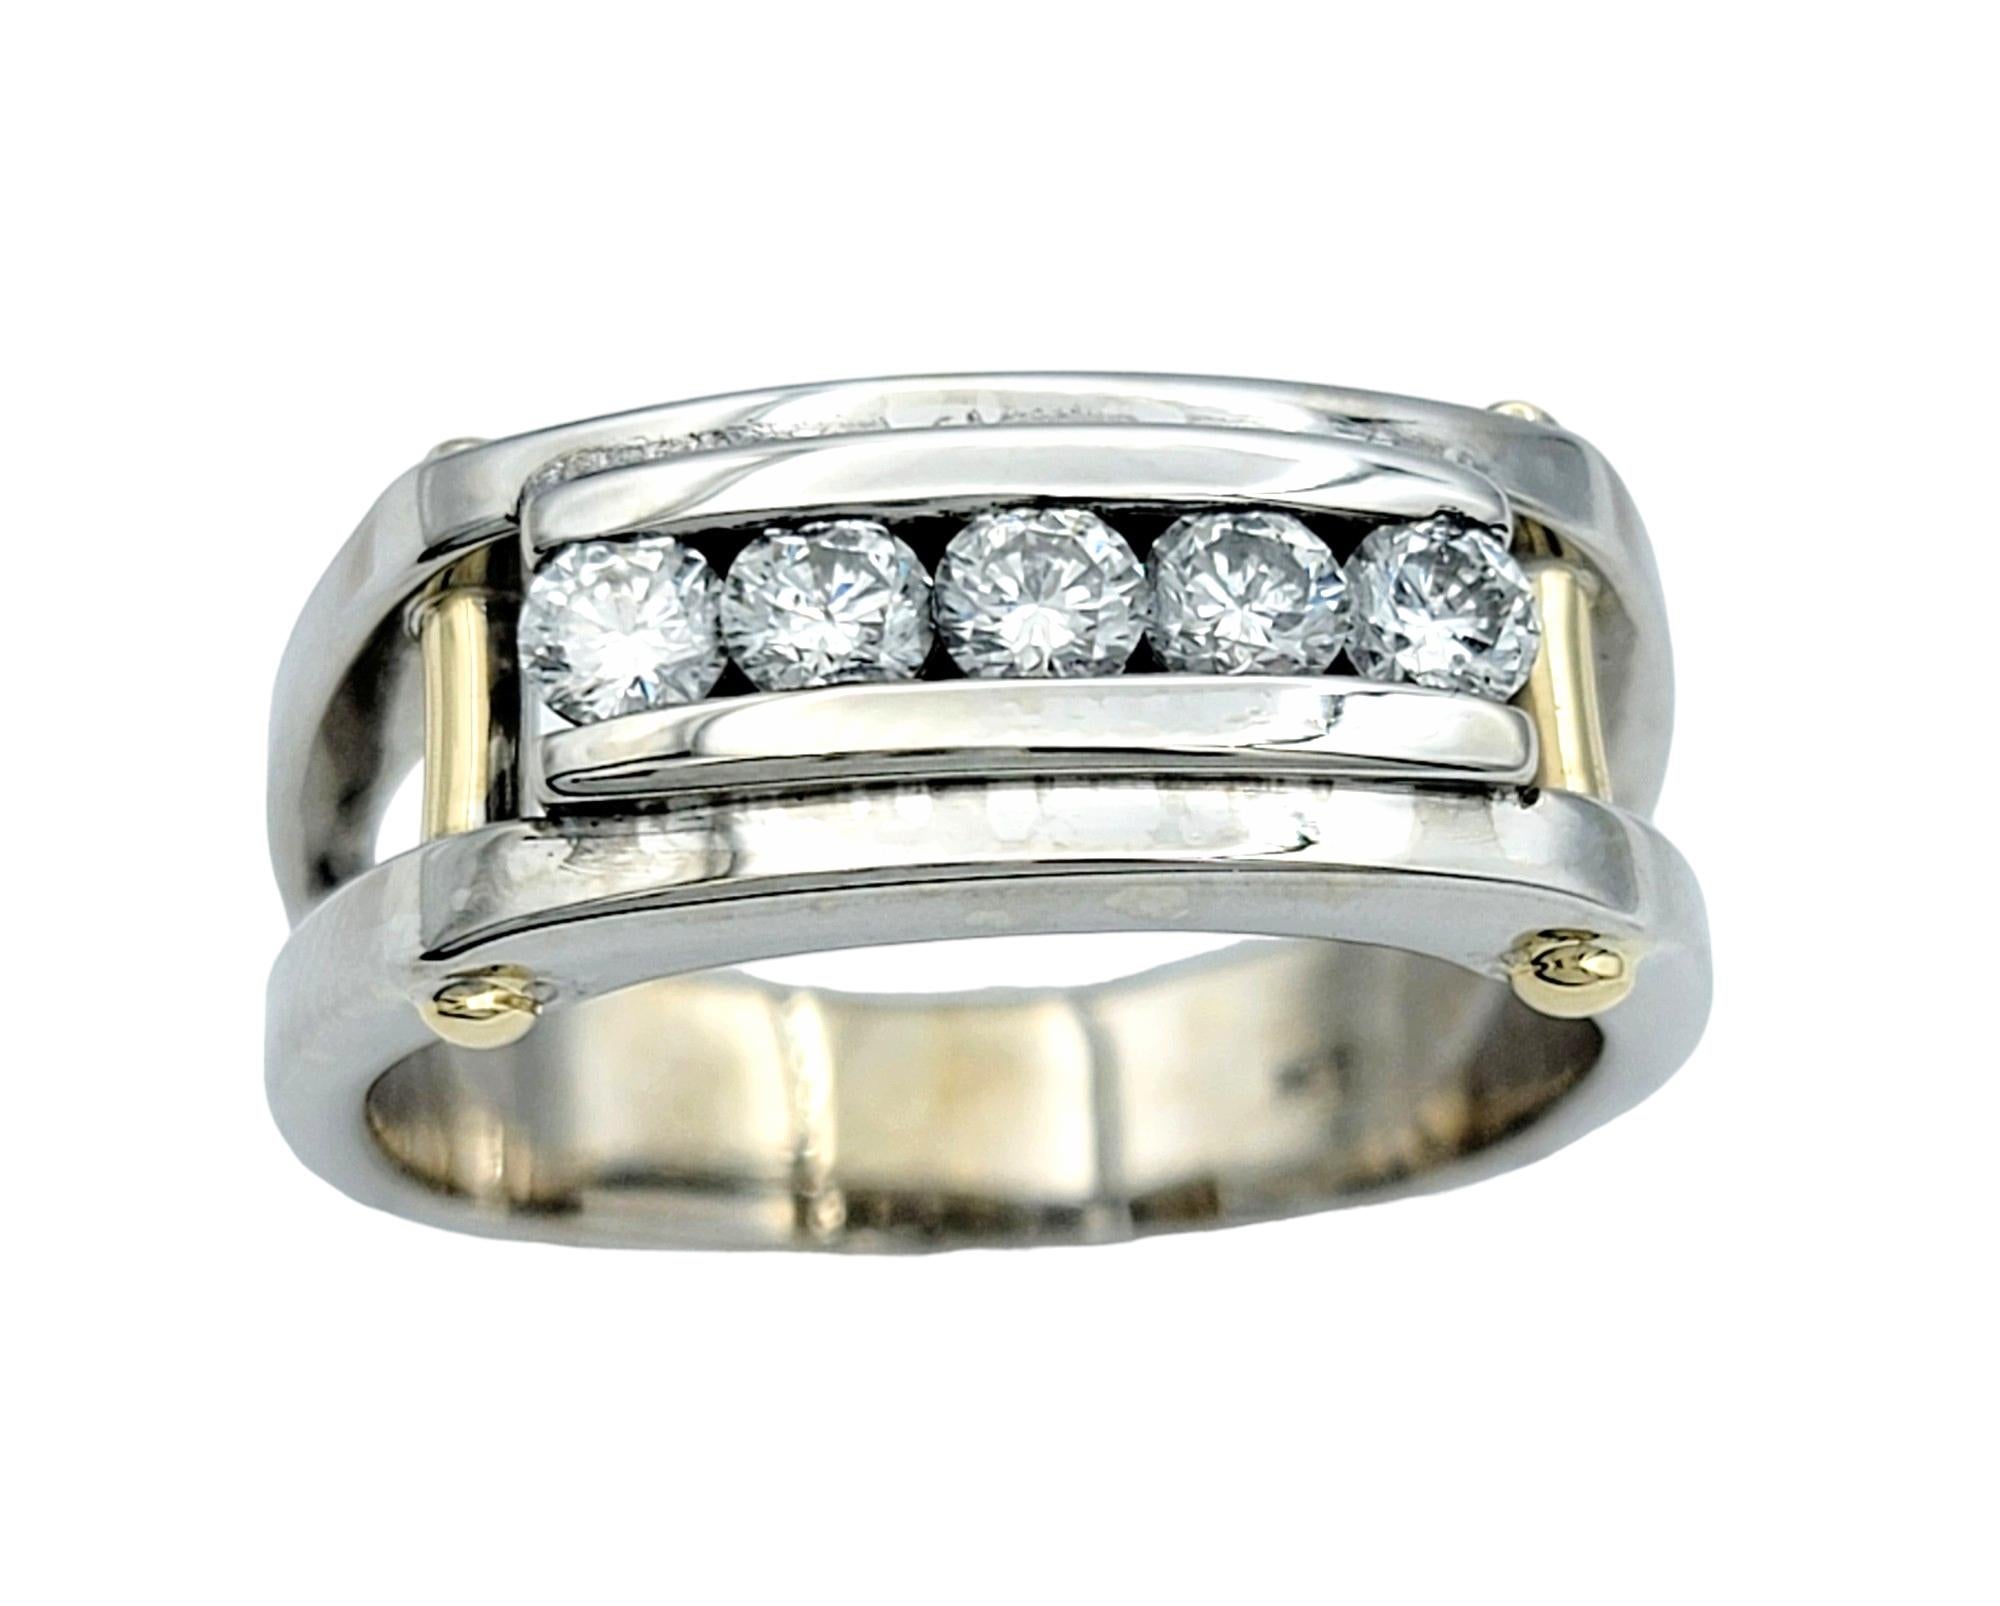 Ring Size: 9.75

Crafted for the modern gentleman, this men's diamond band ring exudes strength and sophistication. Set in a robust combination of 14 karat white and yellow gold, this ring features a bold design that commands attention. The